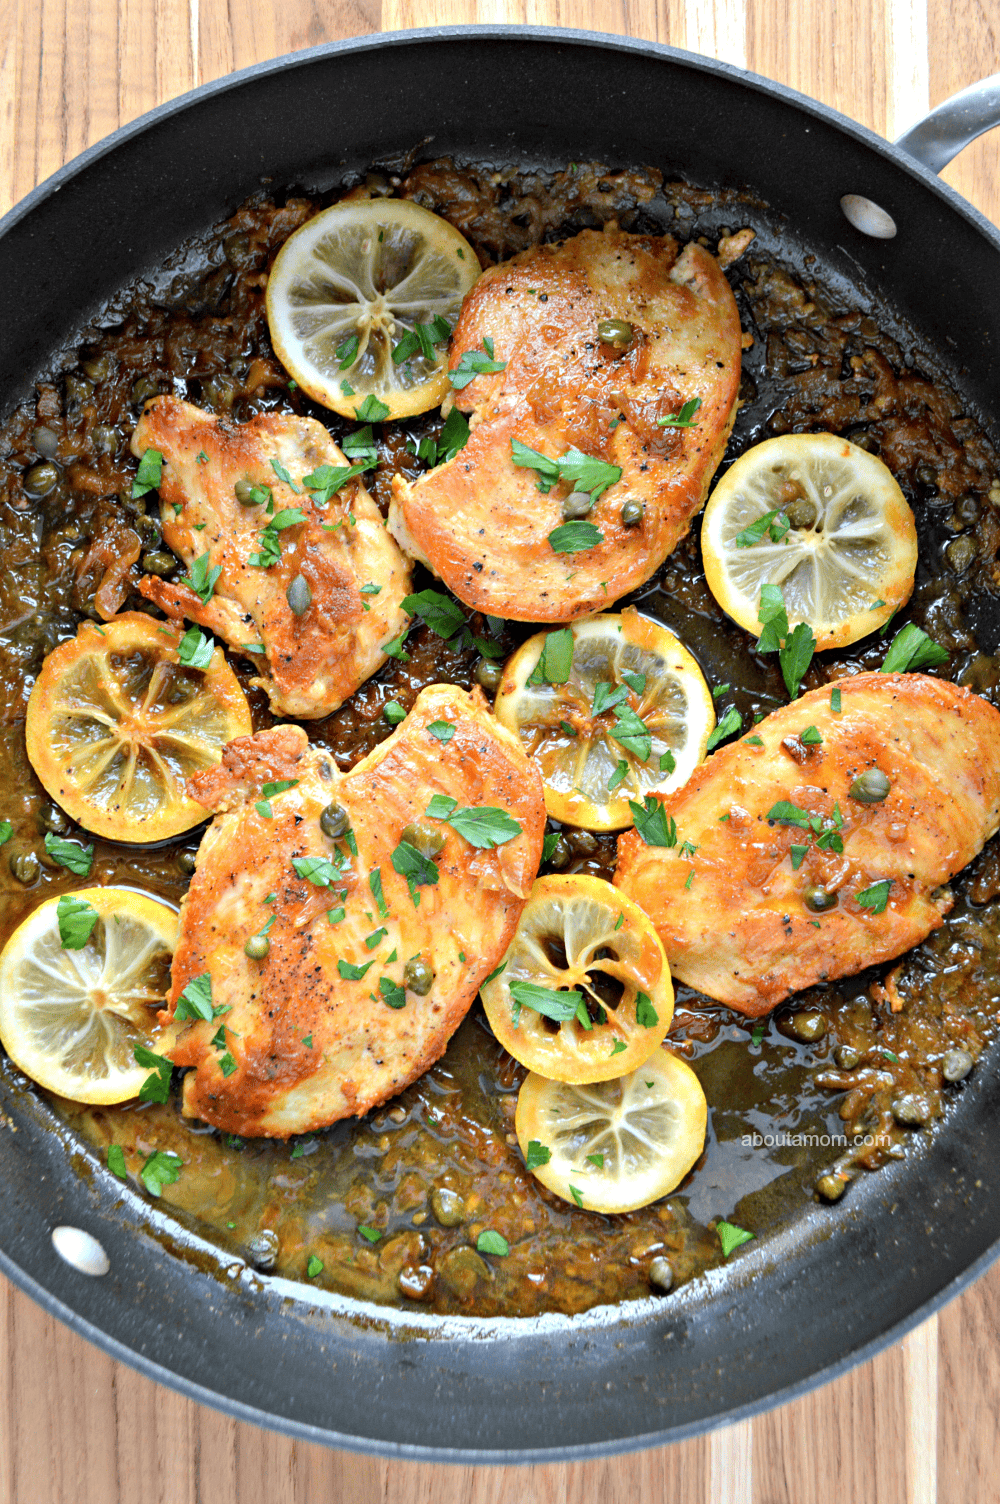 Sauteed chicken in a buttery lemon sauce with caper and sliced lemon. This flavorful skillet lemon chicken recipe comes together quickly and is perfect for a busy weeknight.